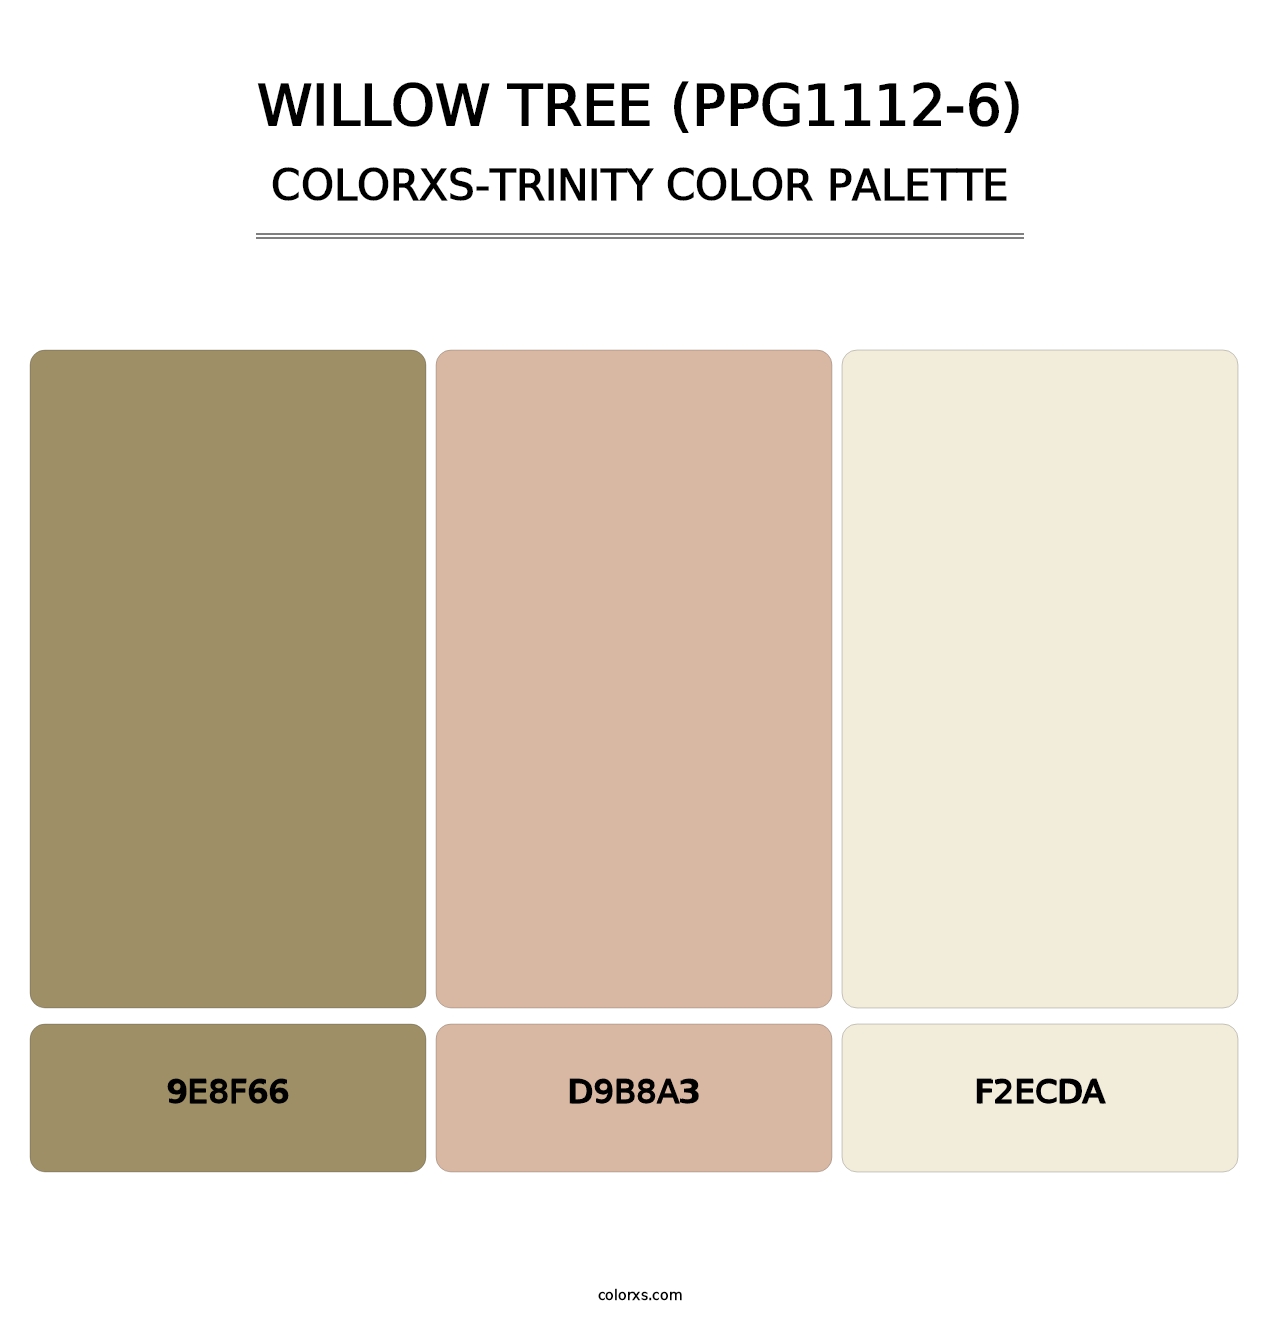 Willow Tree (PPG1112-6) - Colorxs Trinity Palette